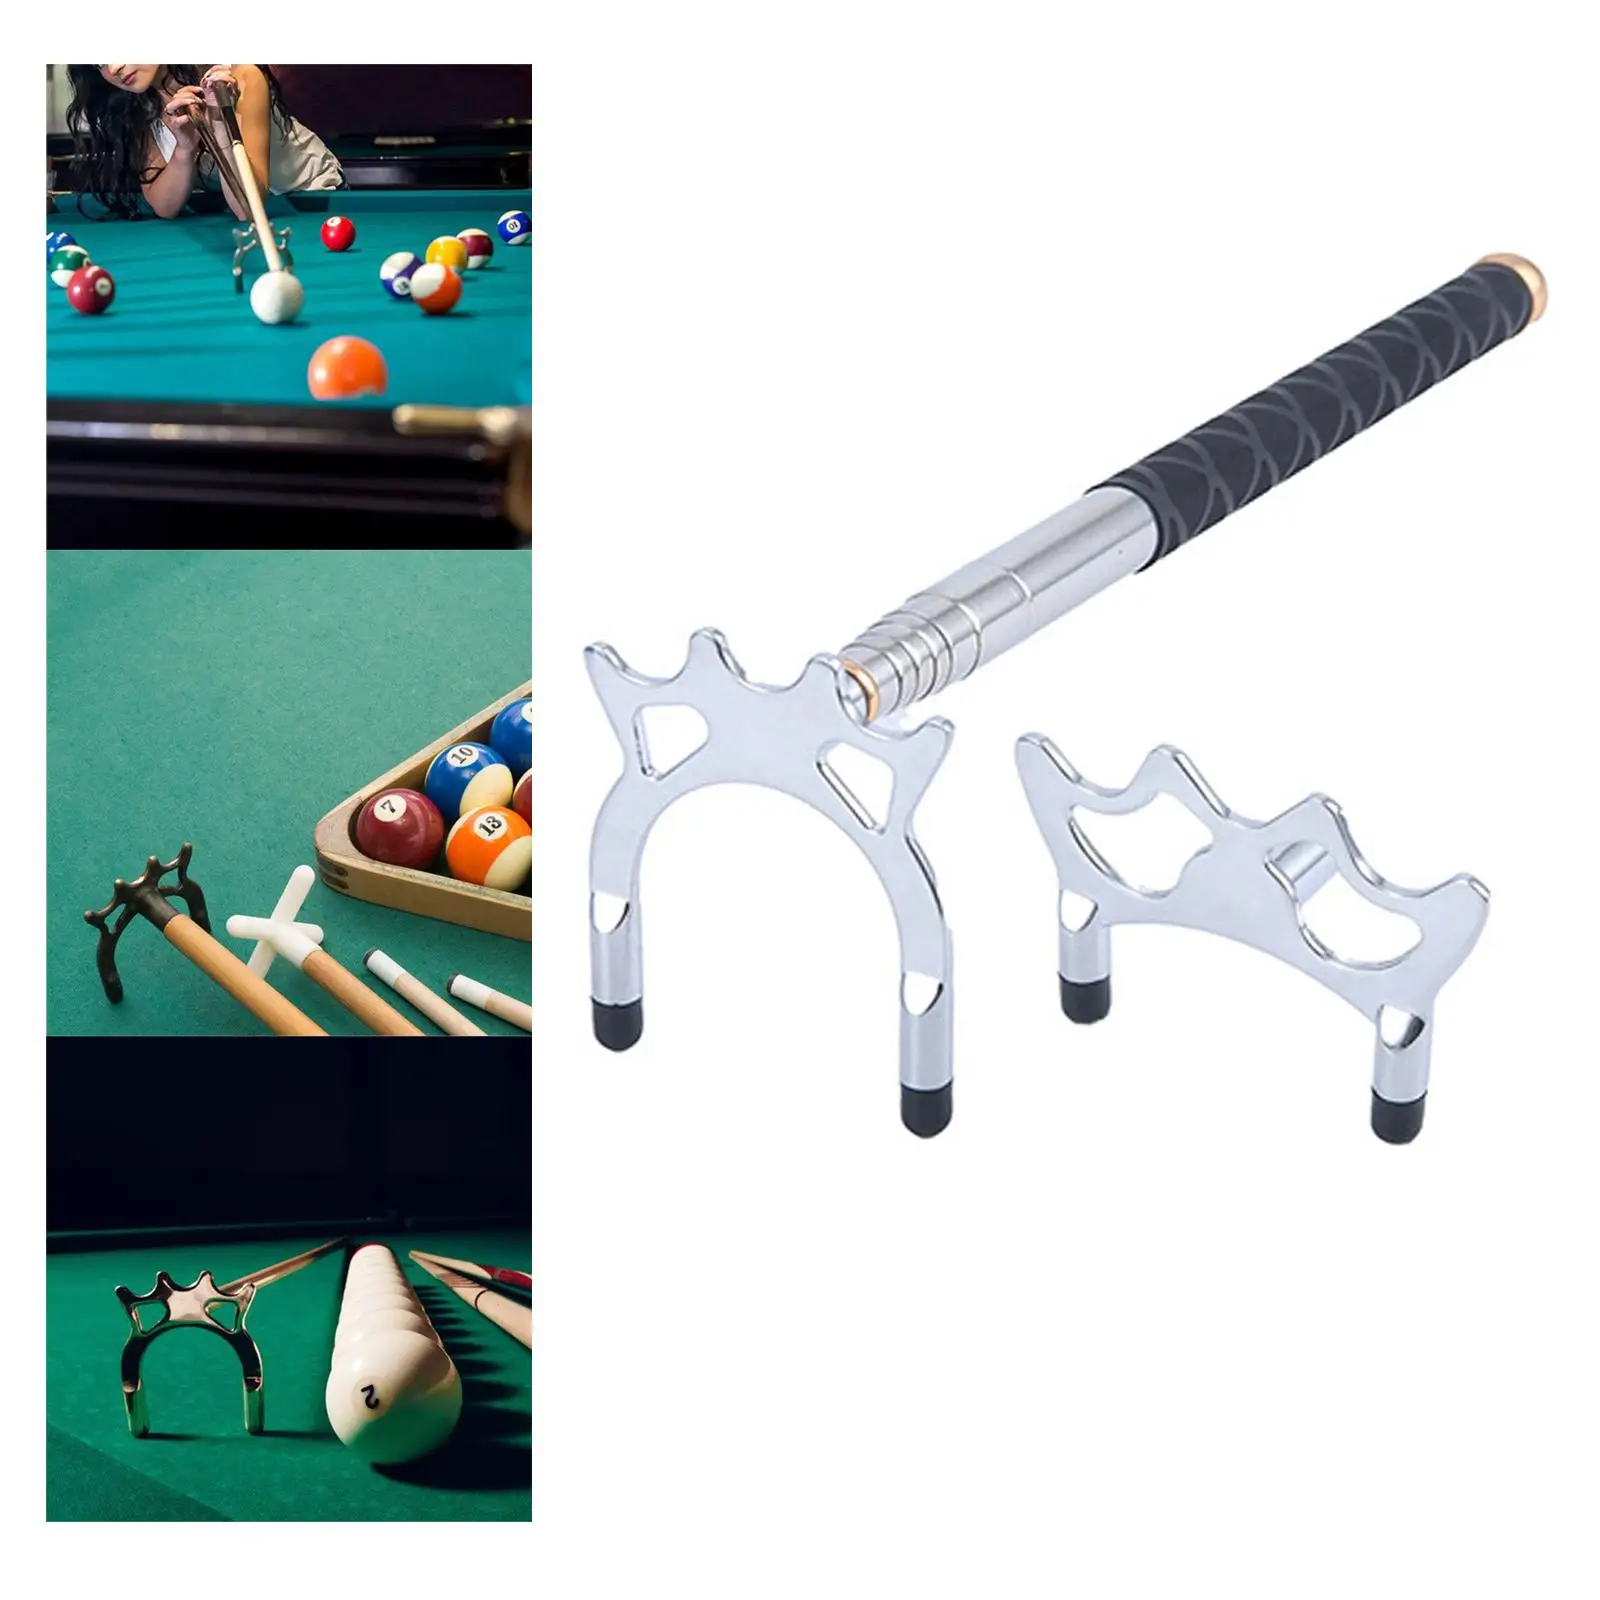 Retractable Billiards Cue Stick Bridge Bridge Head Stainless Steel Extender for Pool Table Training Competition Accessory